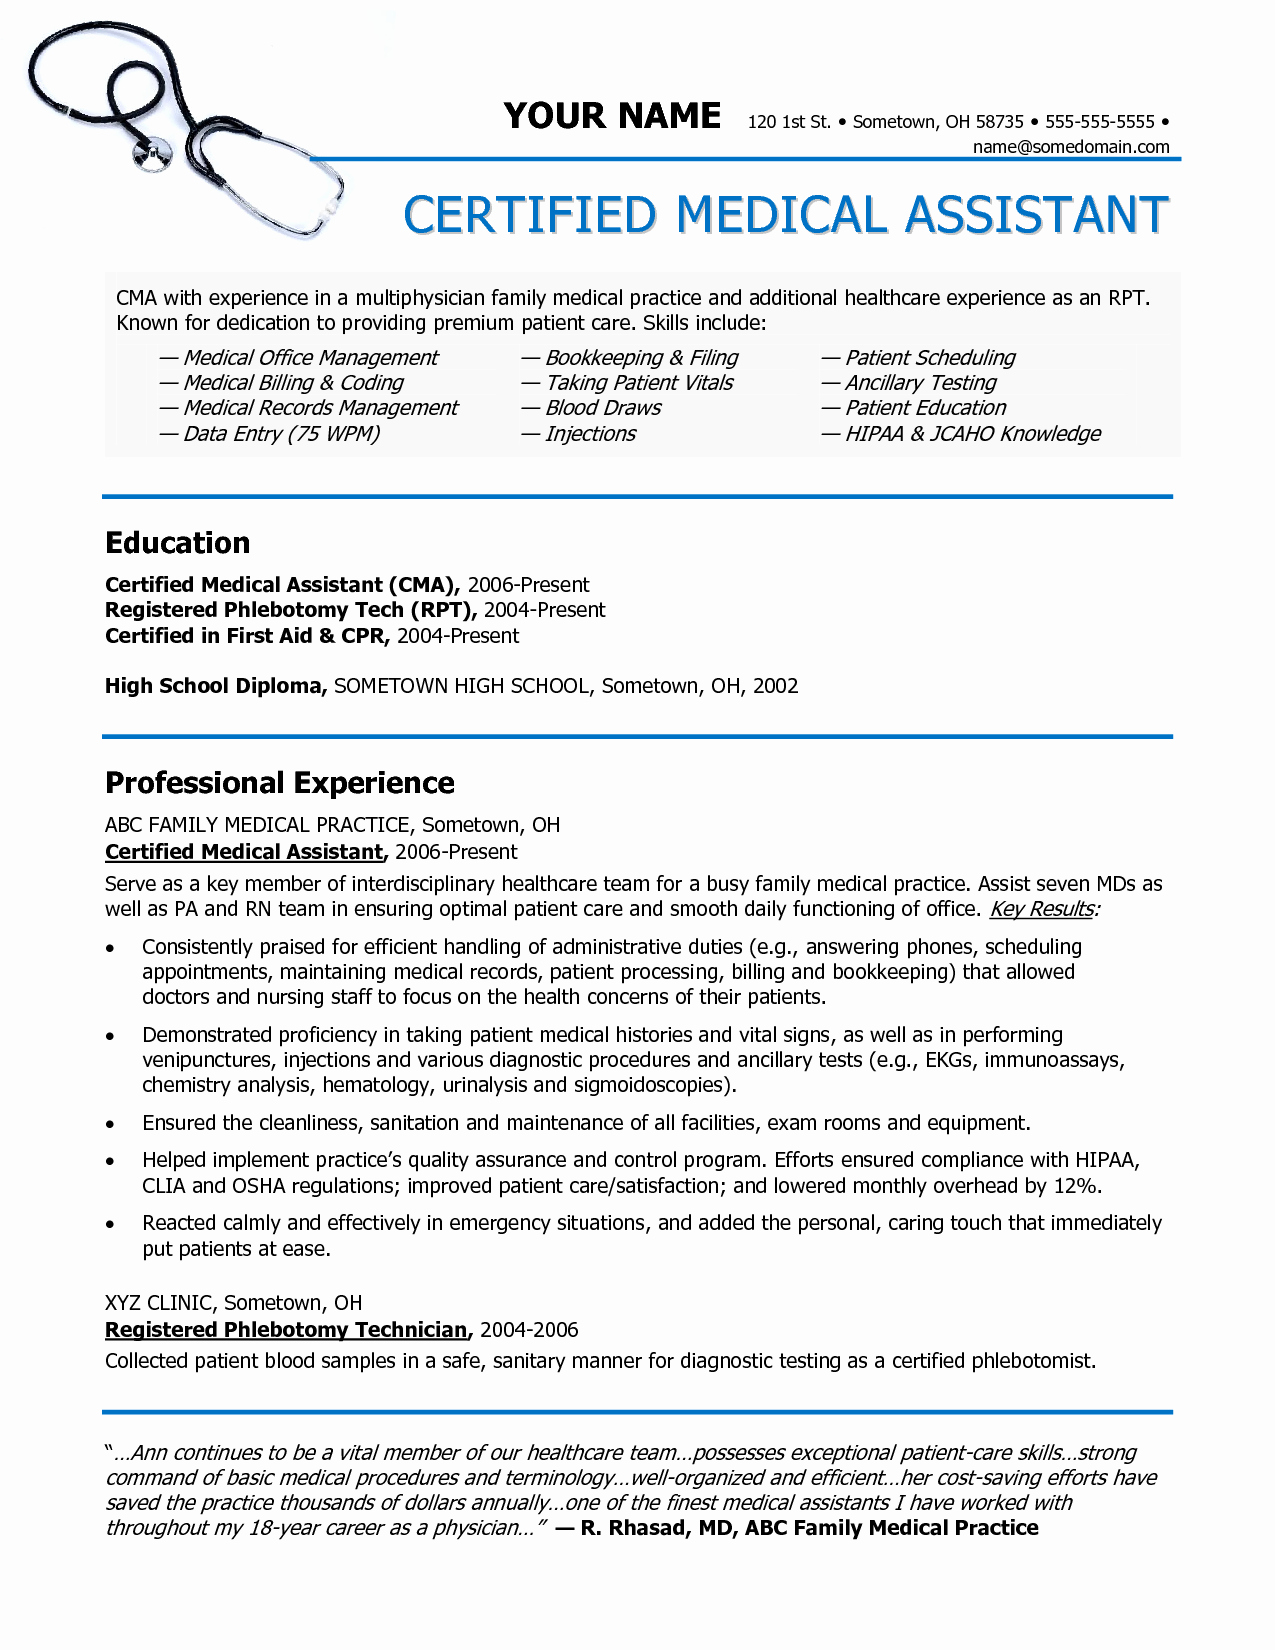 Medical assistant Resume Entry Level Examples 18 Medical